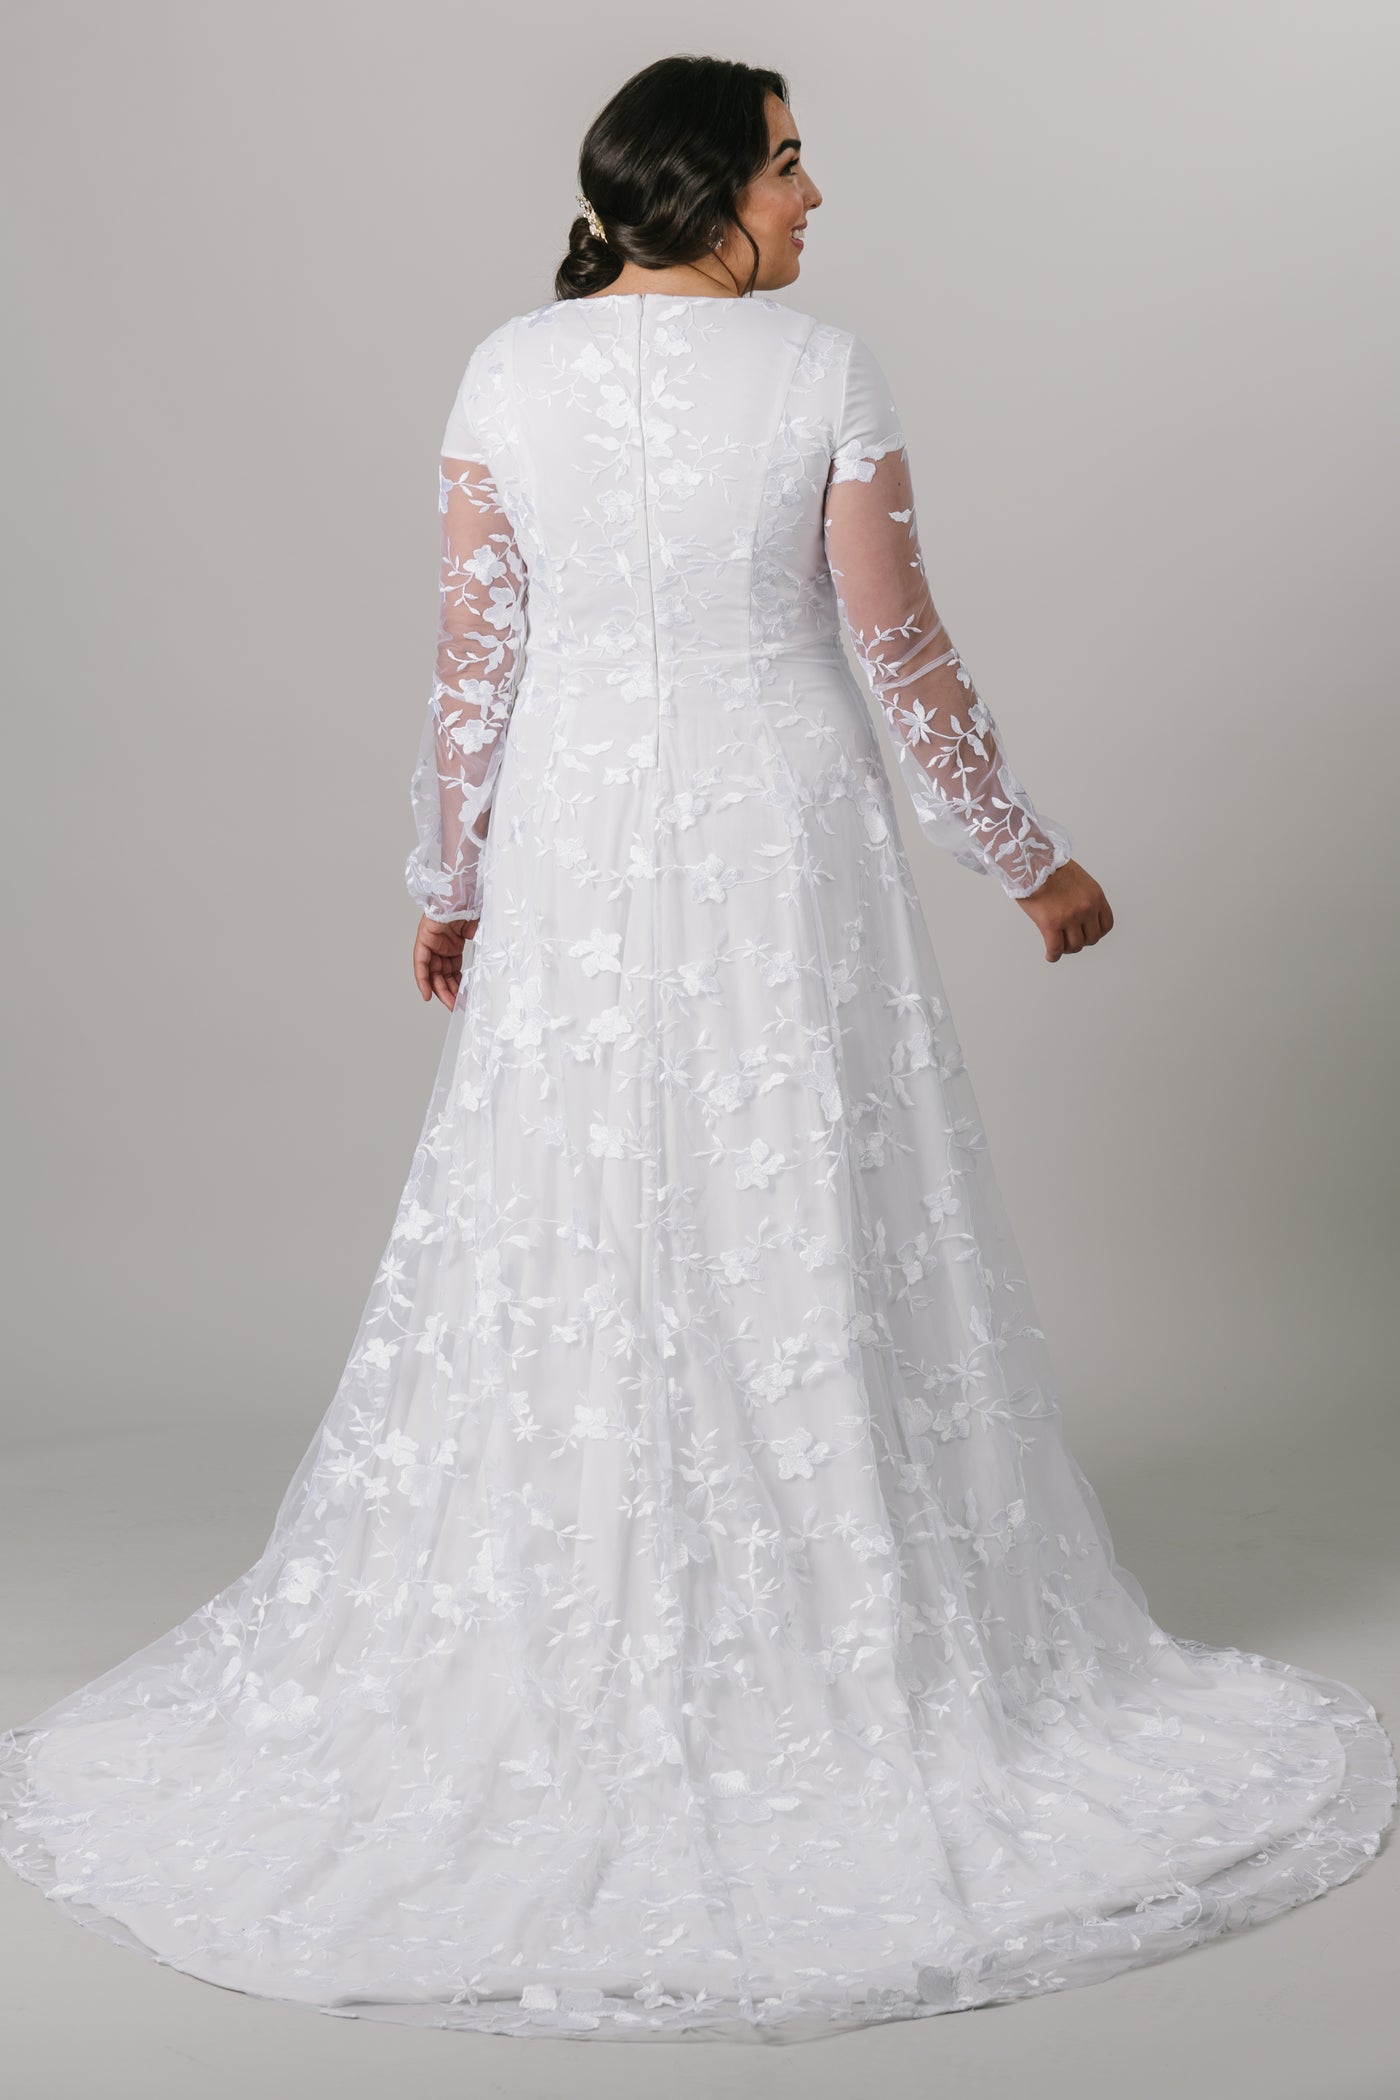 This long-sleeve modest wedding dress features a hand-embroidered lace pattern with an A-line skirt and a prairie chic feel. Plus size available in store.  Style Love: The soft puff of the sleeve is undeniably darling, and we are smitten with the flow of the skirt. Totally twirlable! From a bridal shop in downtown SLC,Utah.